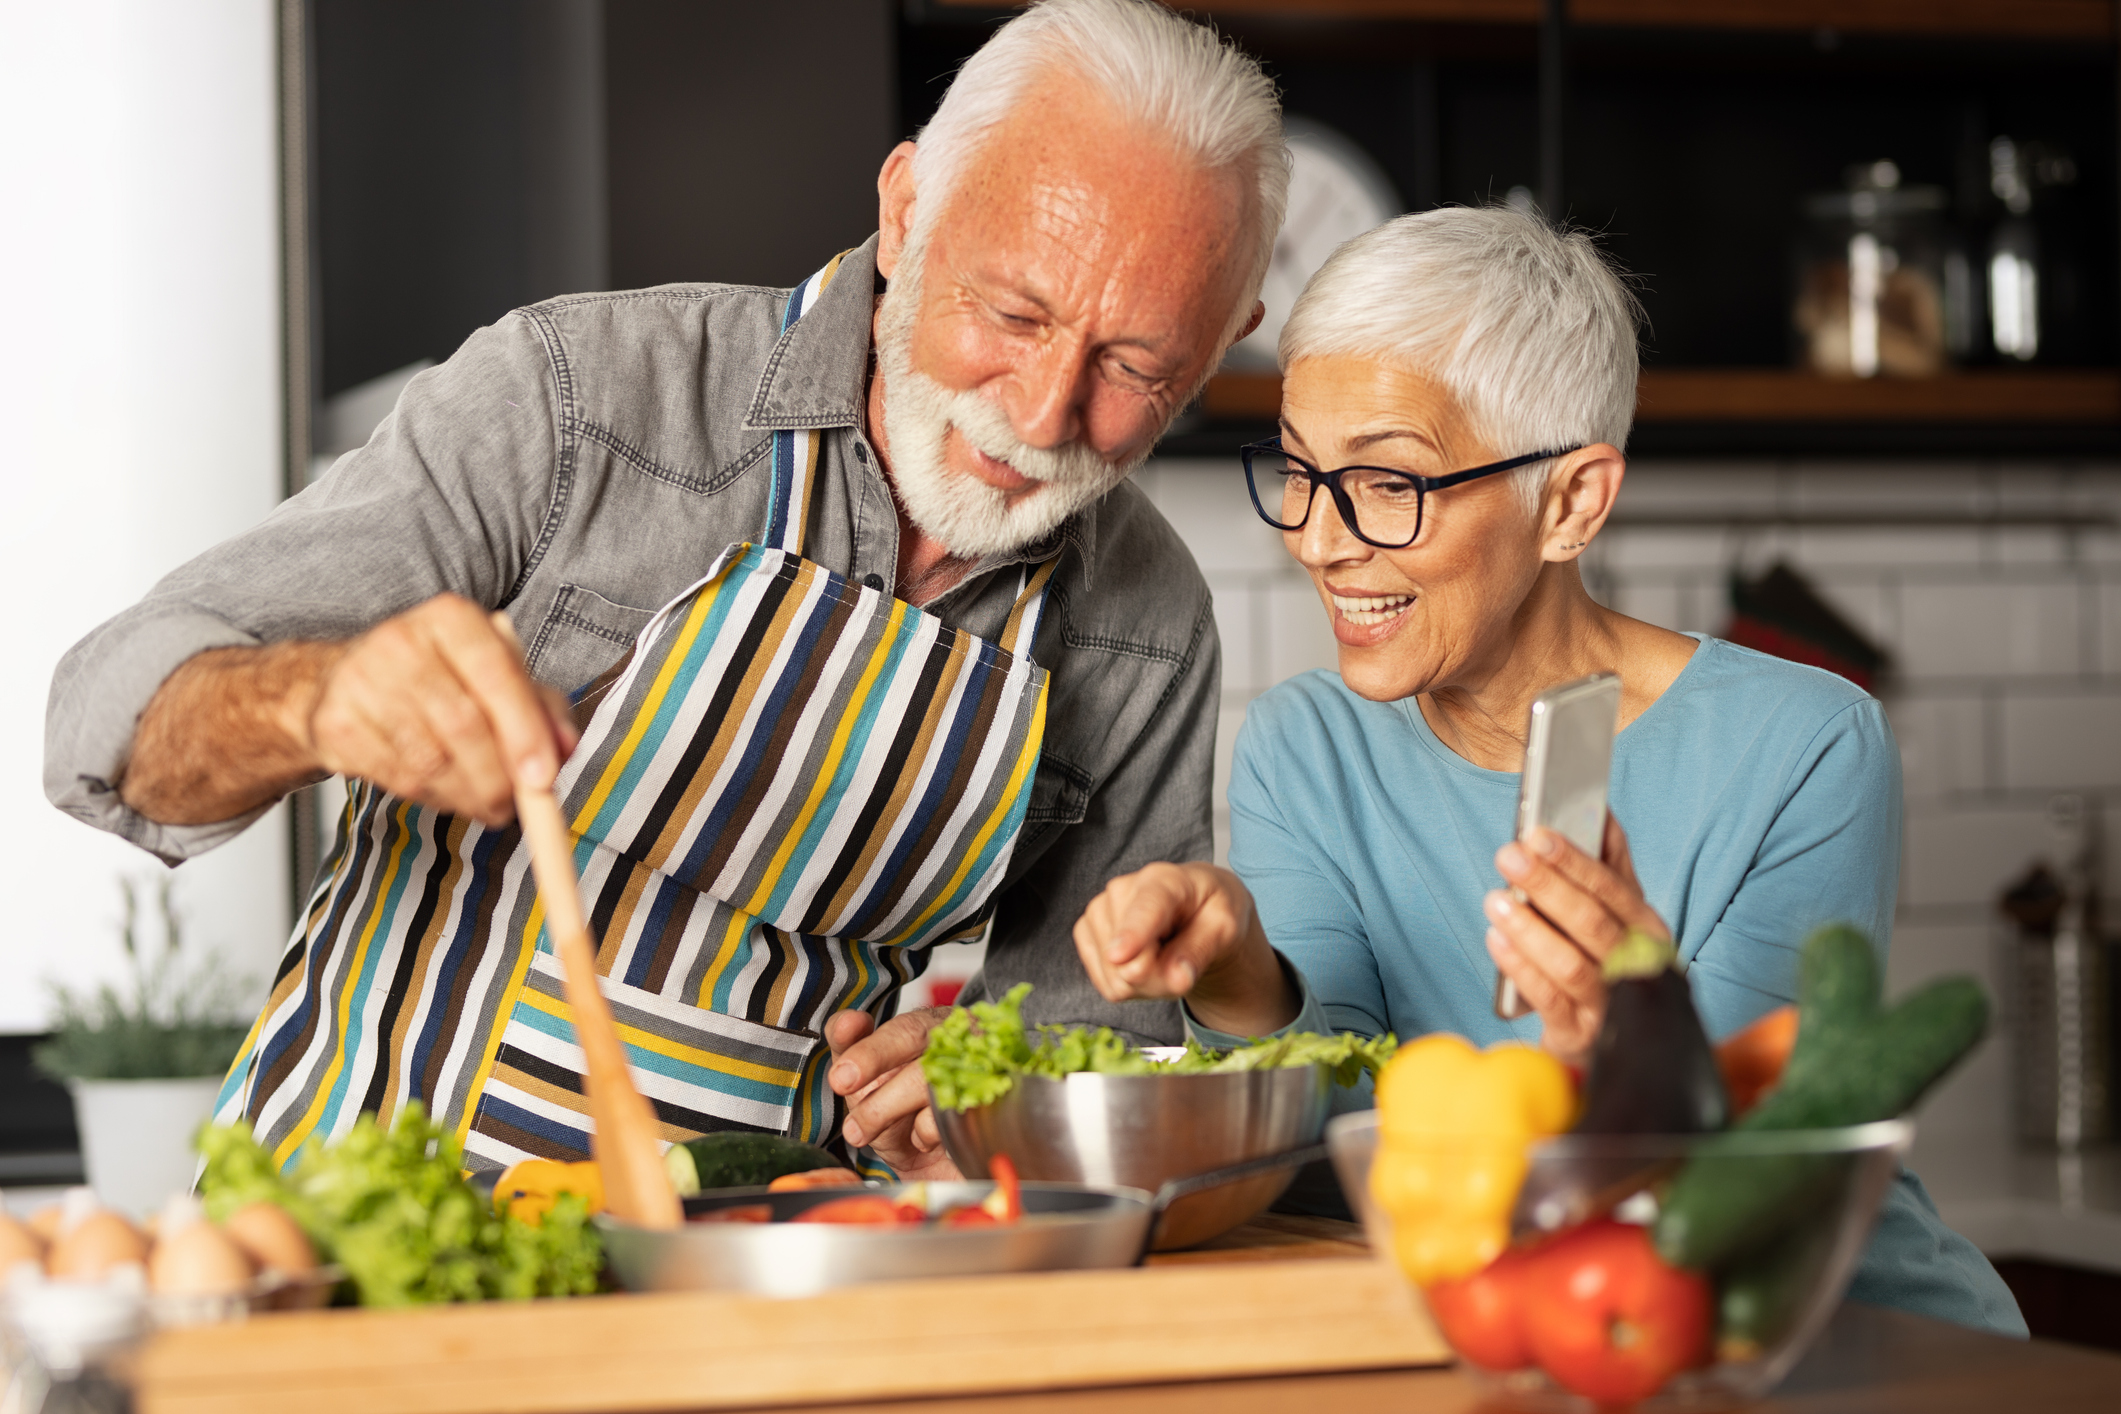 Simple Tips for Healthy Eating and Healthy Aging